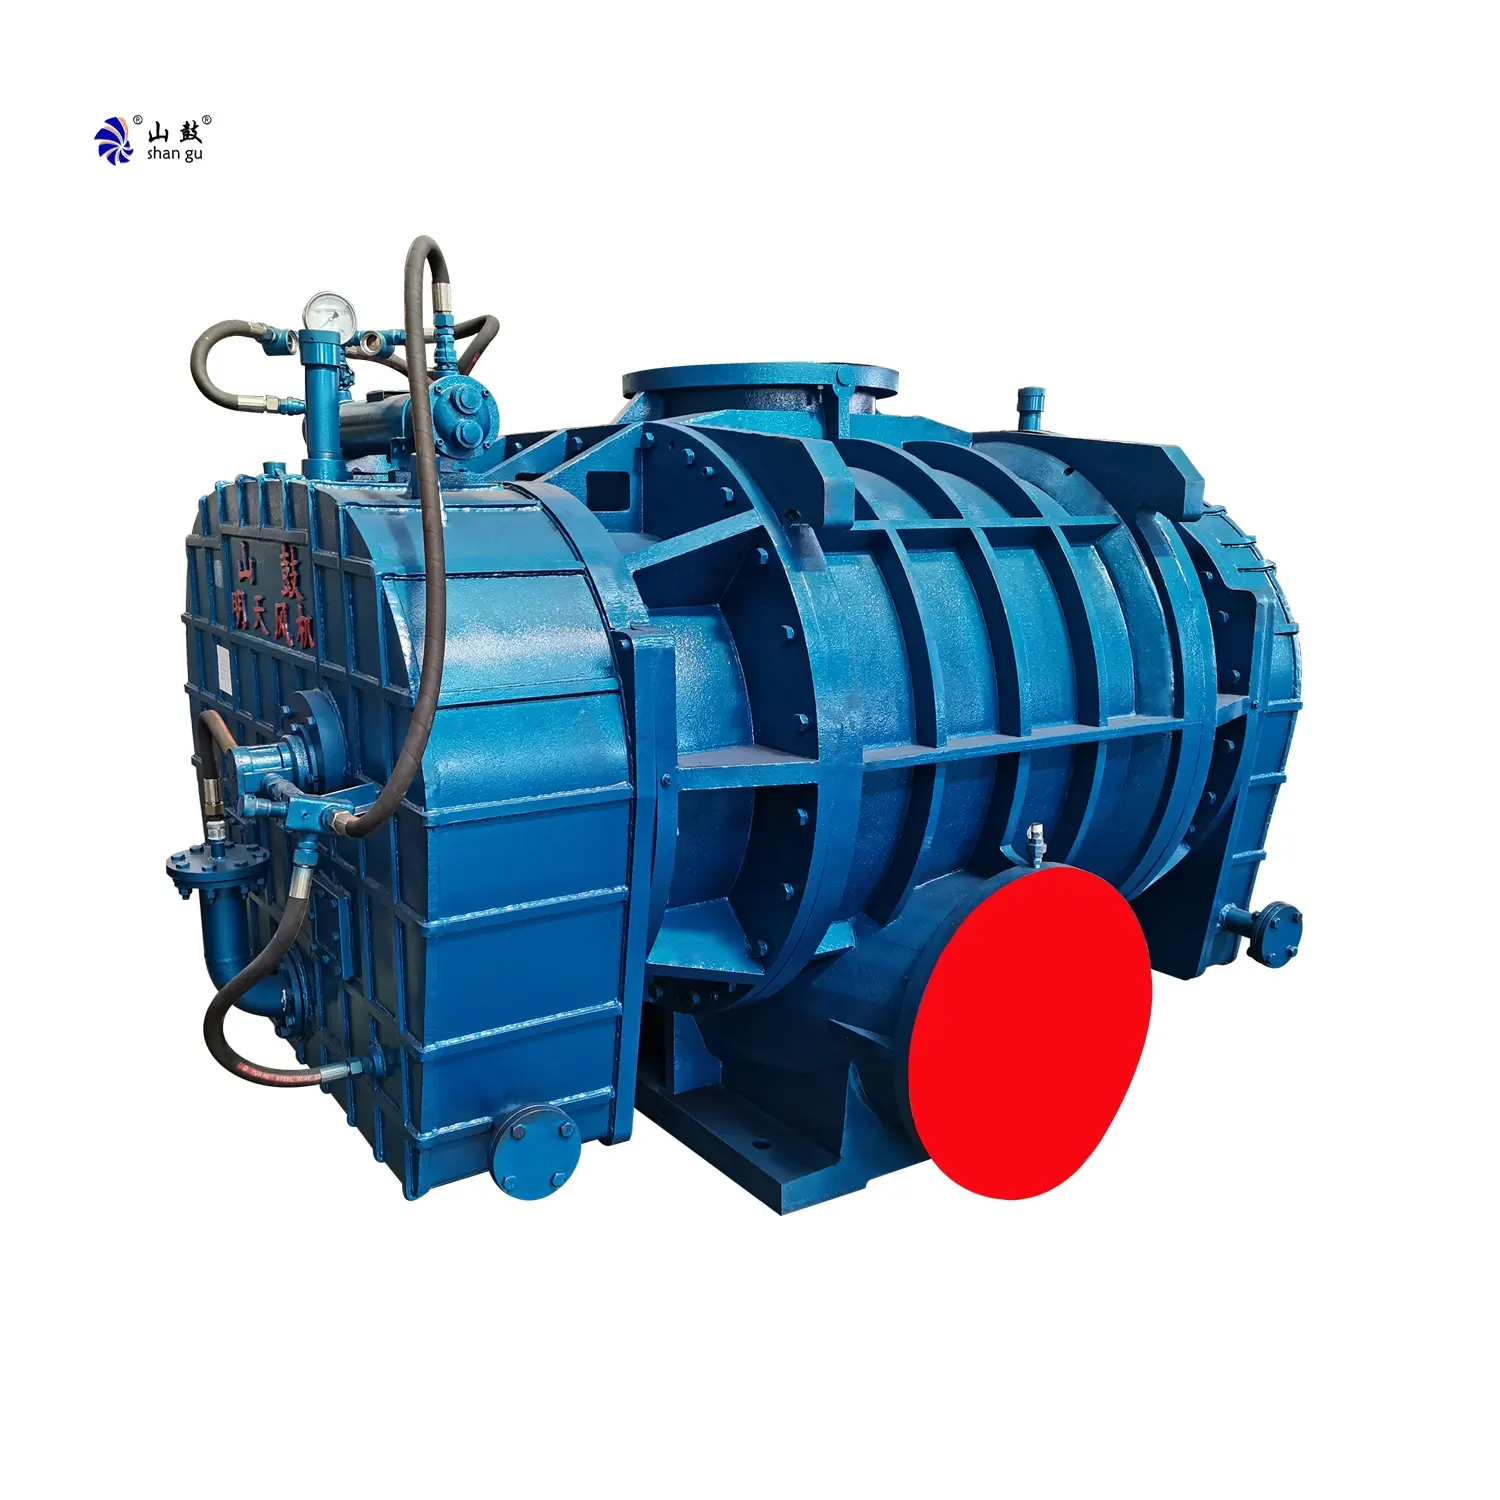 China Origin Big Capacity Twin Lobe Roots Blower Driven by IE3 Motor For PSA Process in Oxygen Making Plant